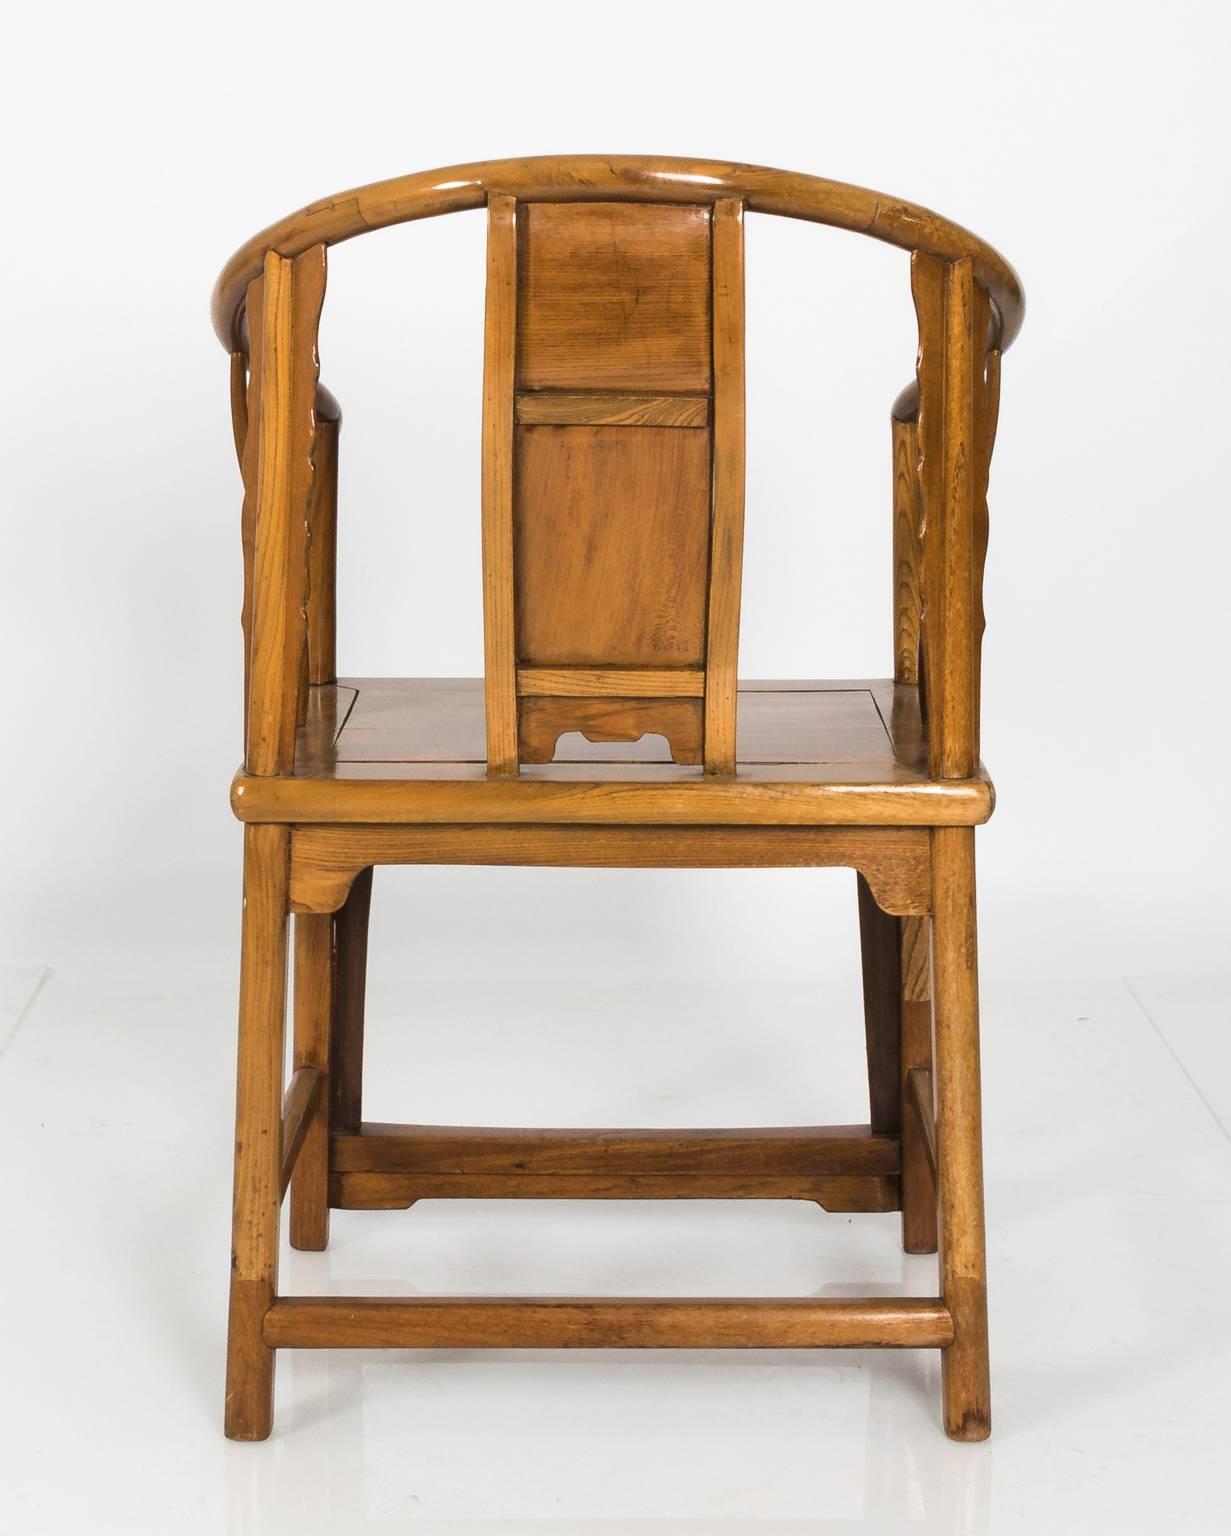 Pair of Chinese slat back armchairs in Elmwood that feature Lao Tsu carvings on the back, circa late 19th century.